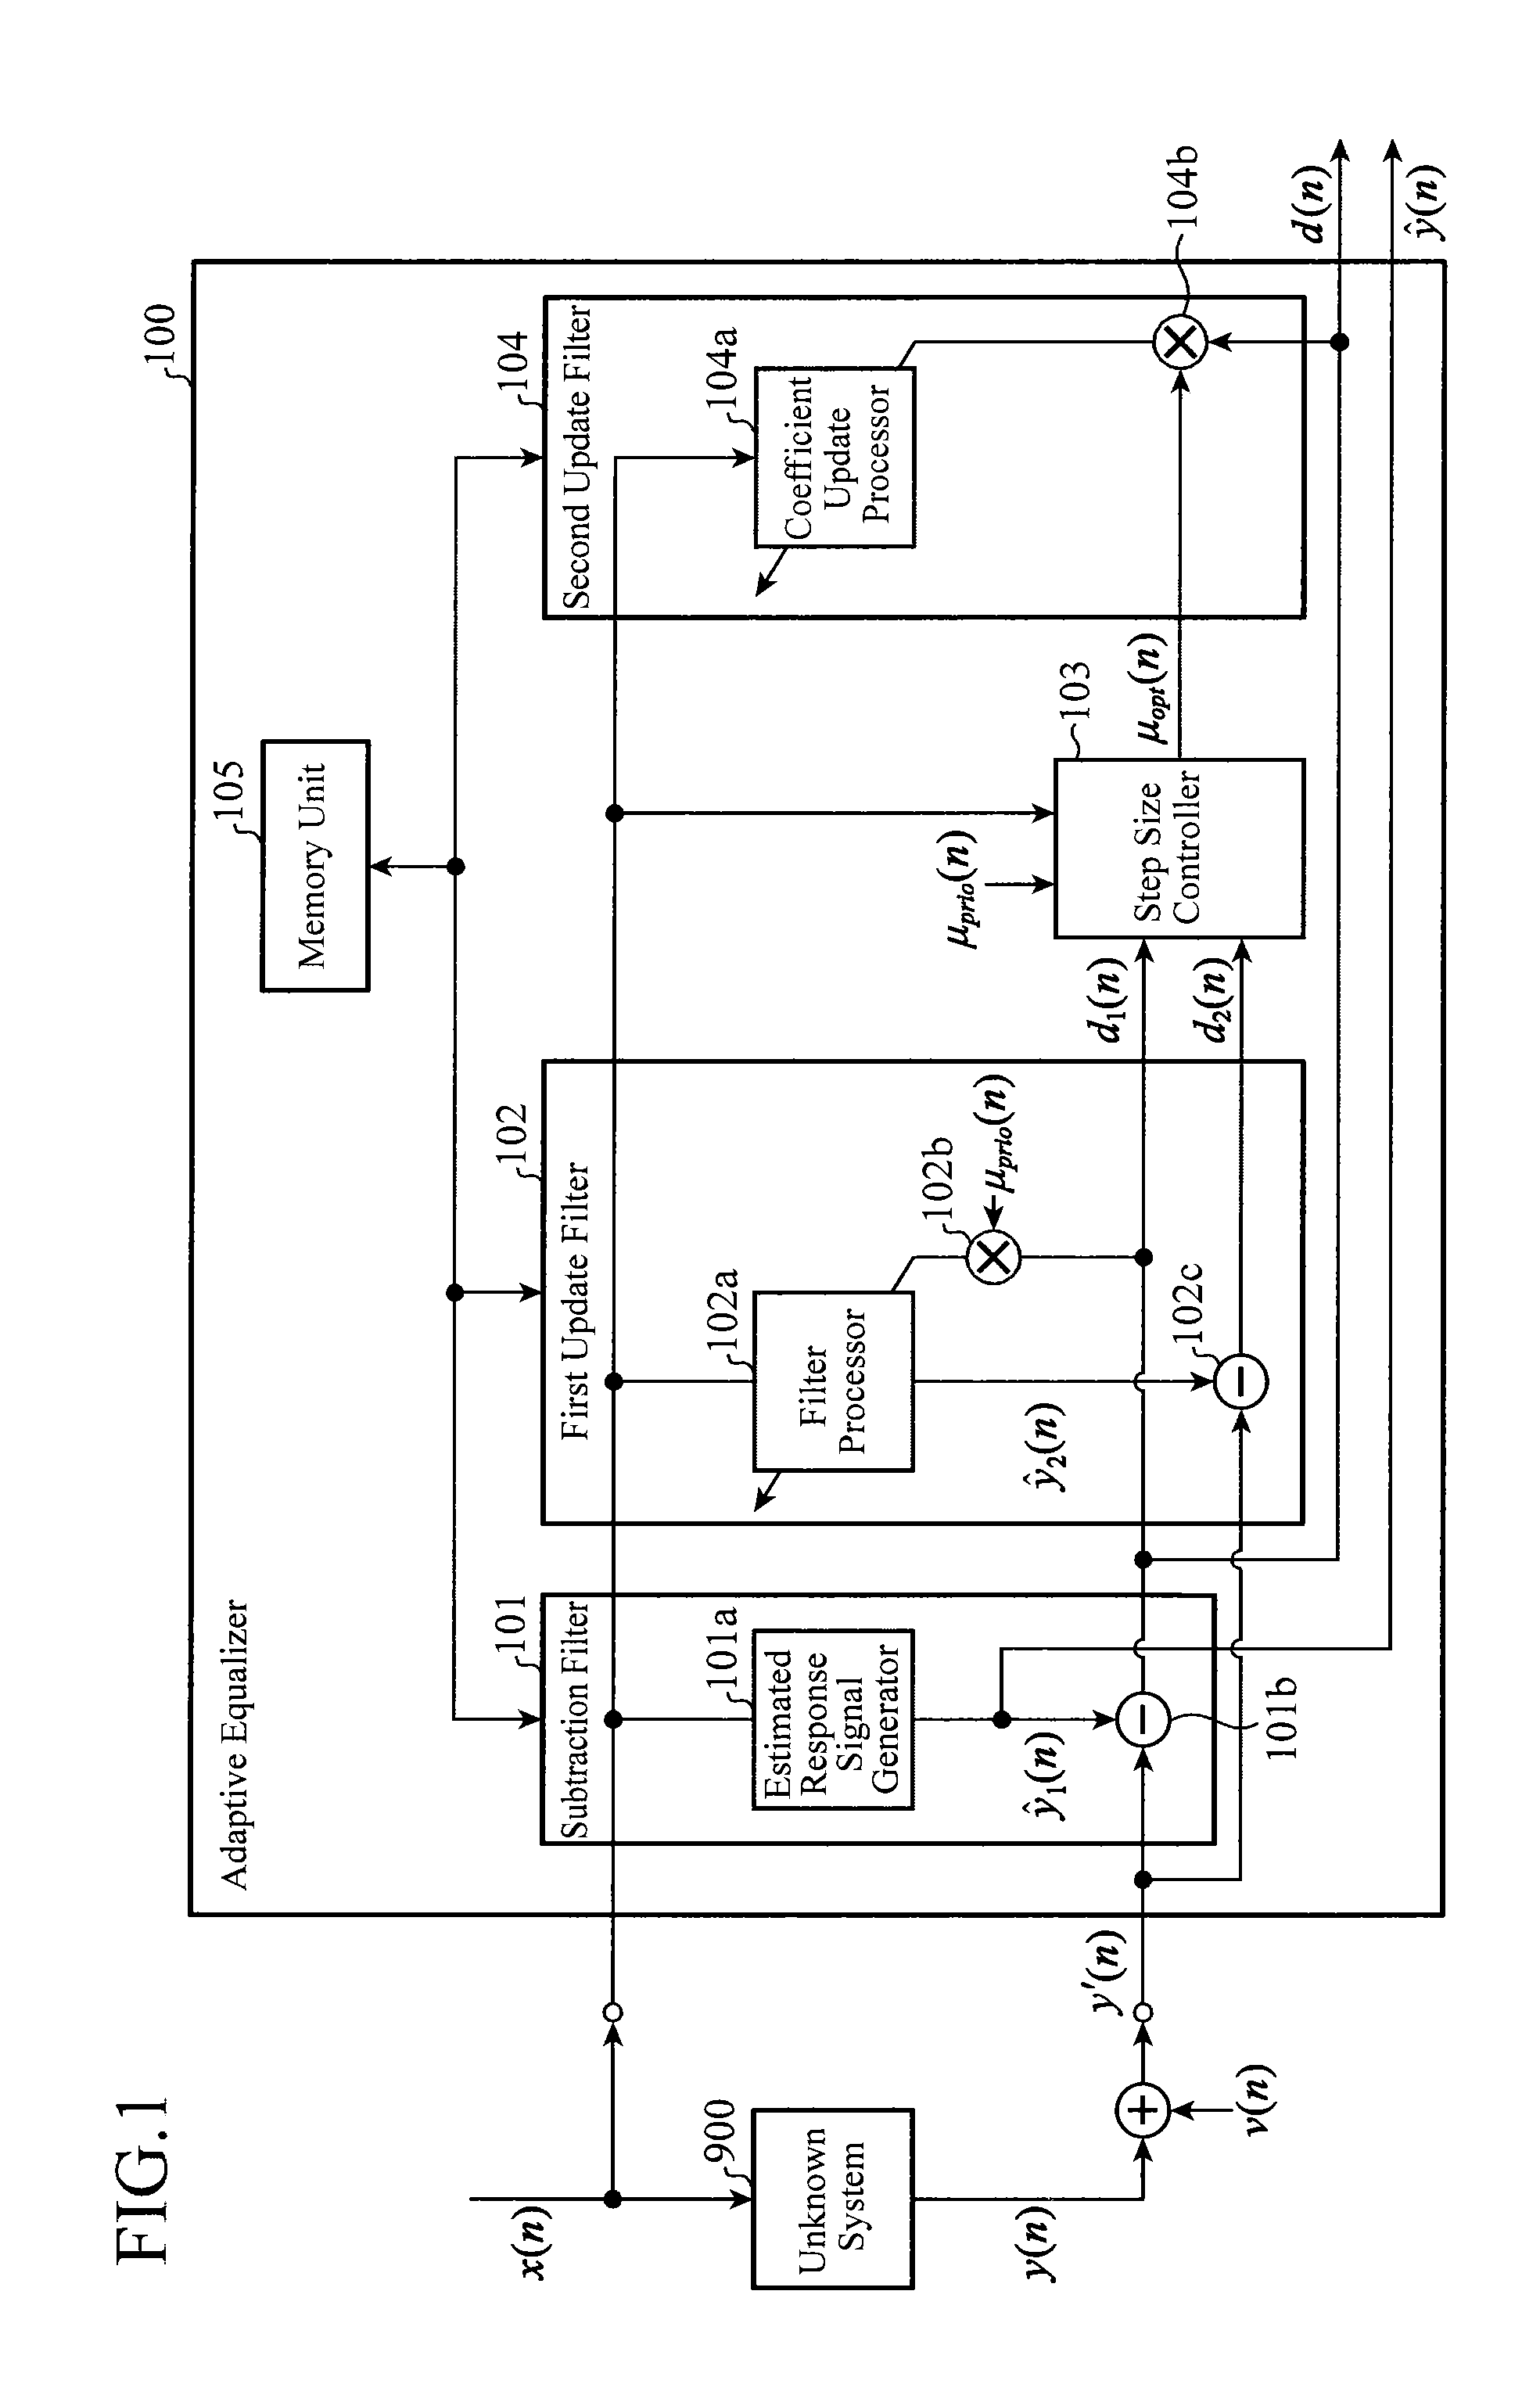 Adaptive equalizer, acoustic echo canceller device, and active noise control device